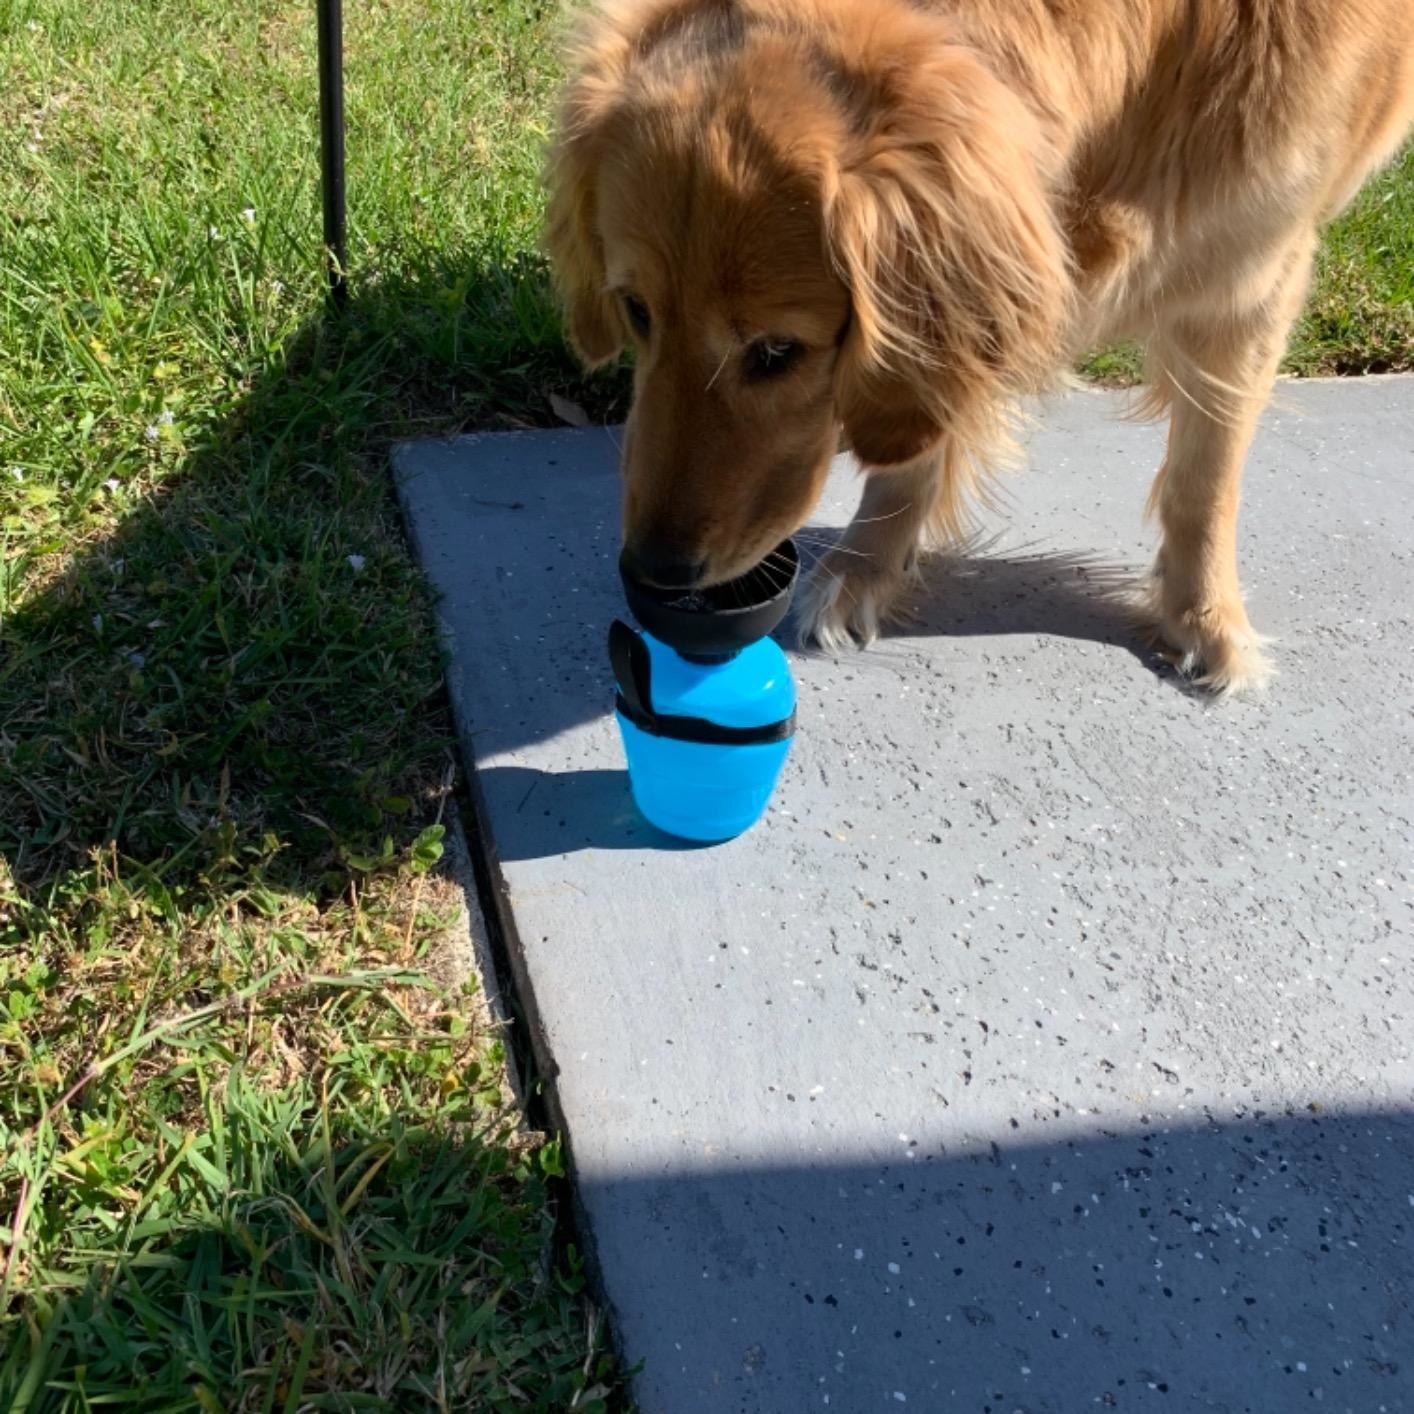 Dog drinks from the built-on cup on the water bottle, directly, without a human needing to hold the bottle